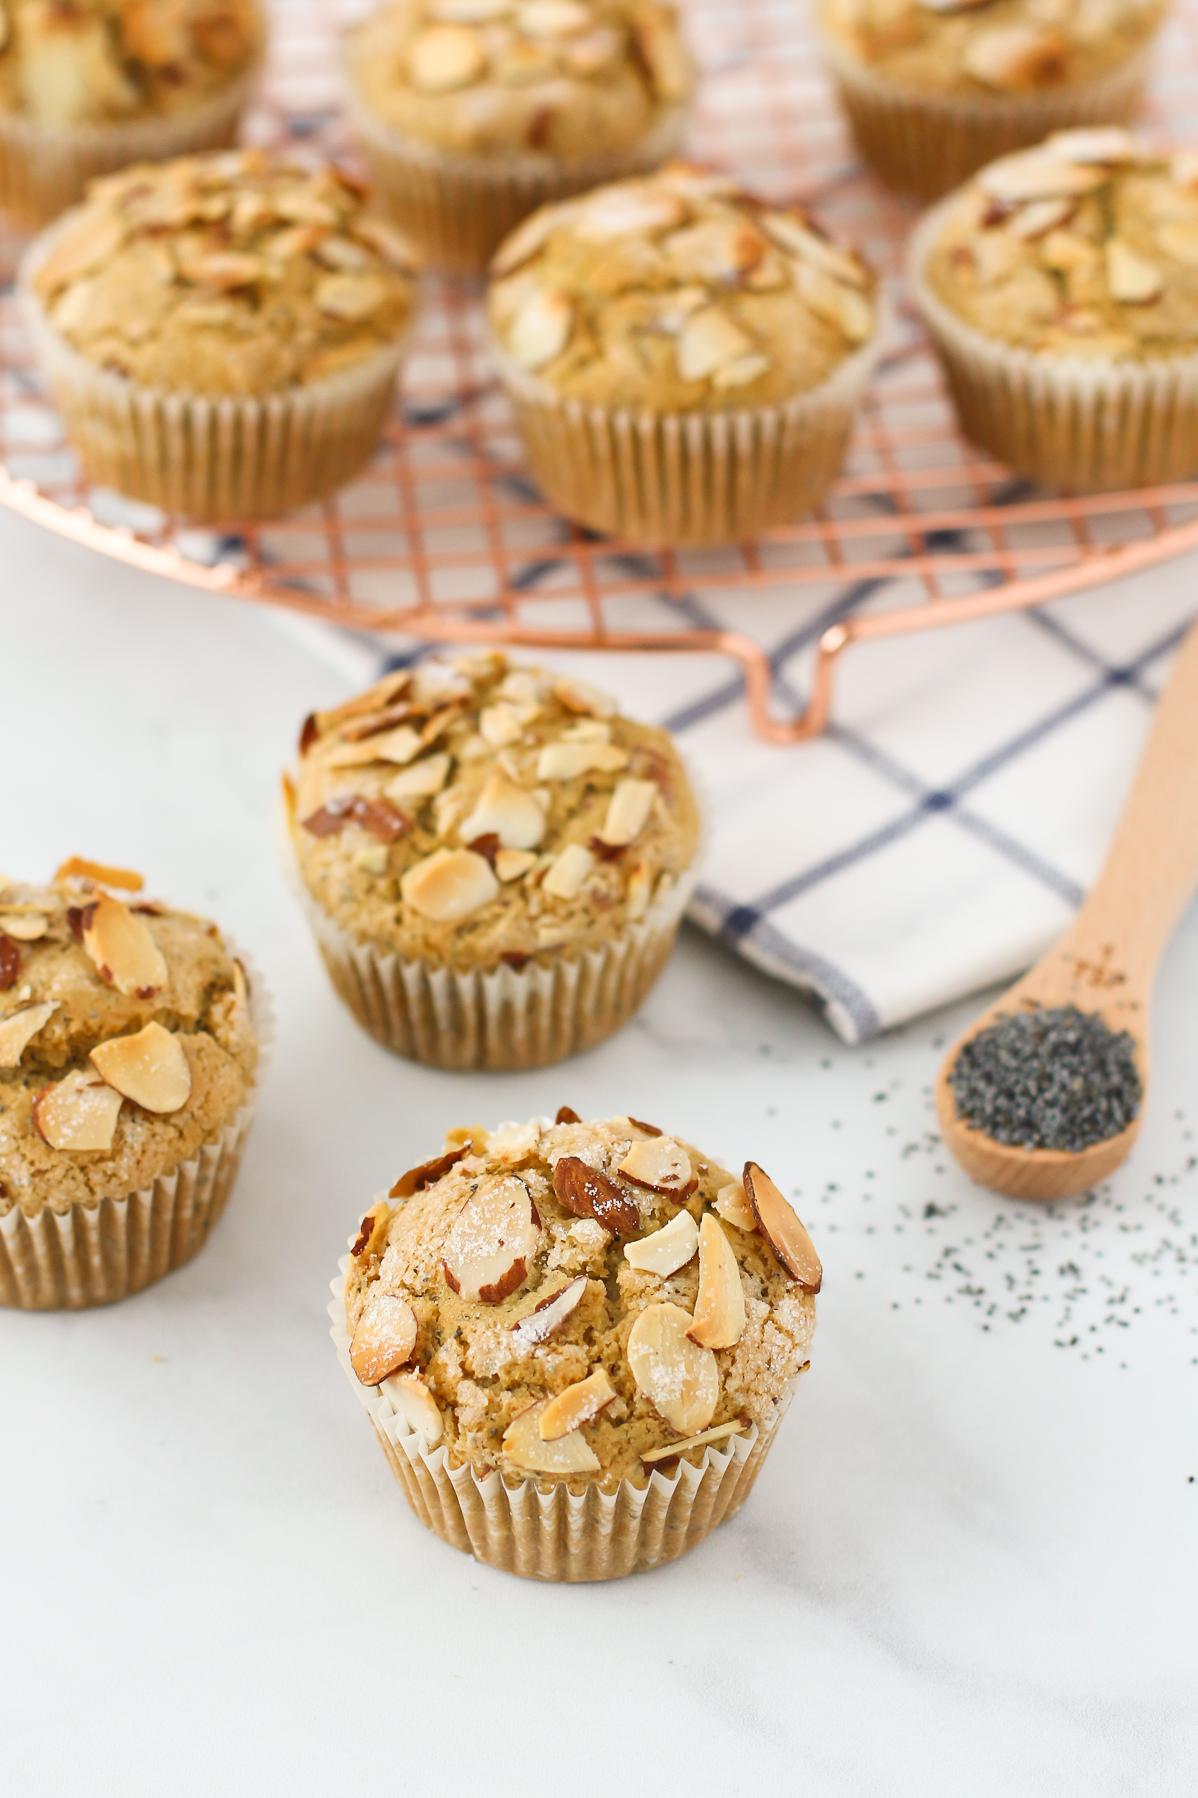  Smell the aroma of freshly-baked muffins wafting through the kitchen.